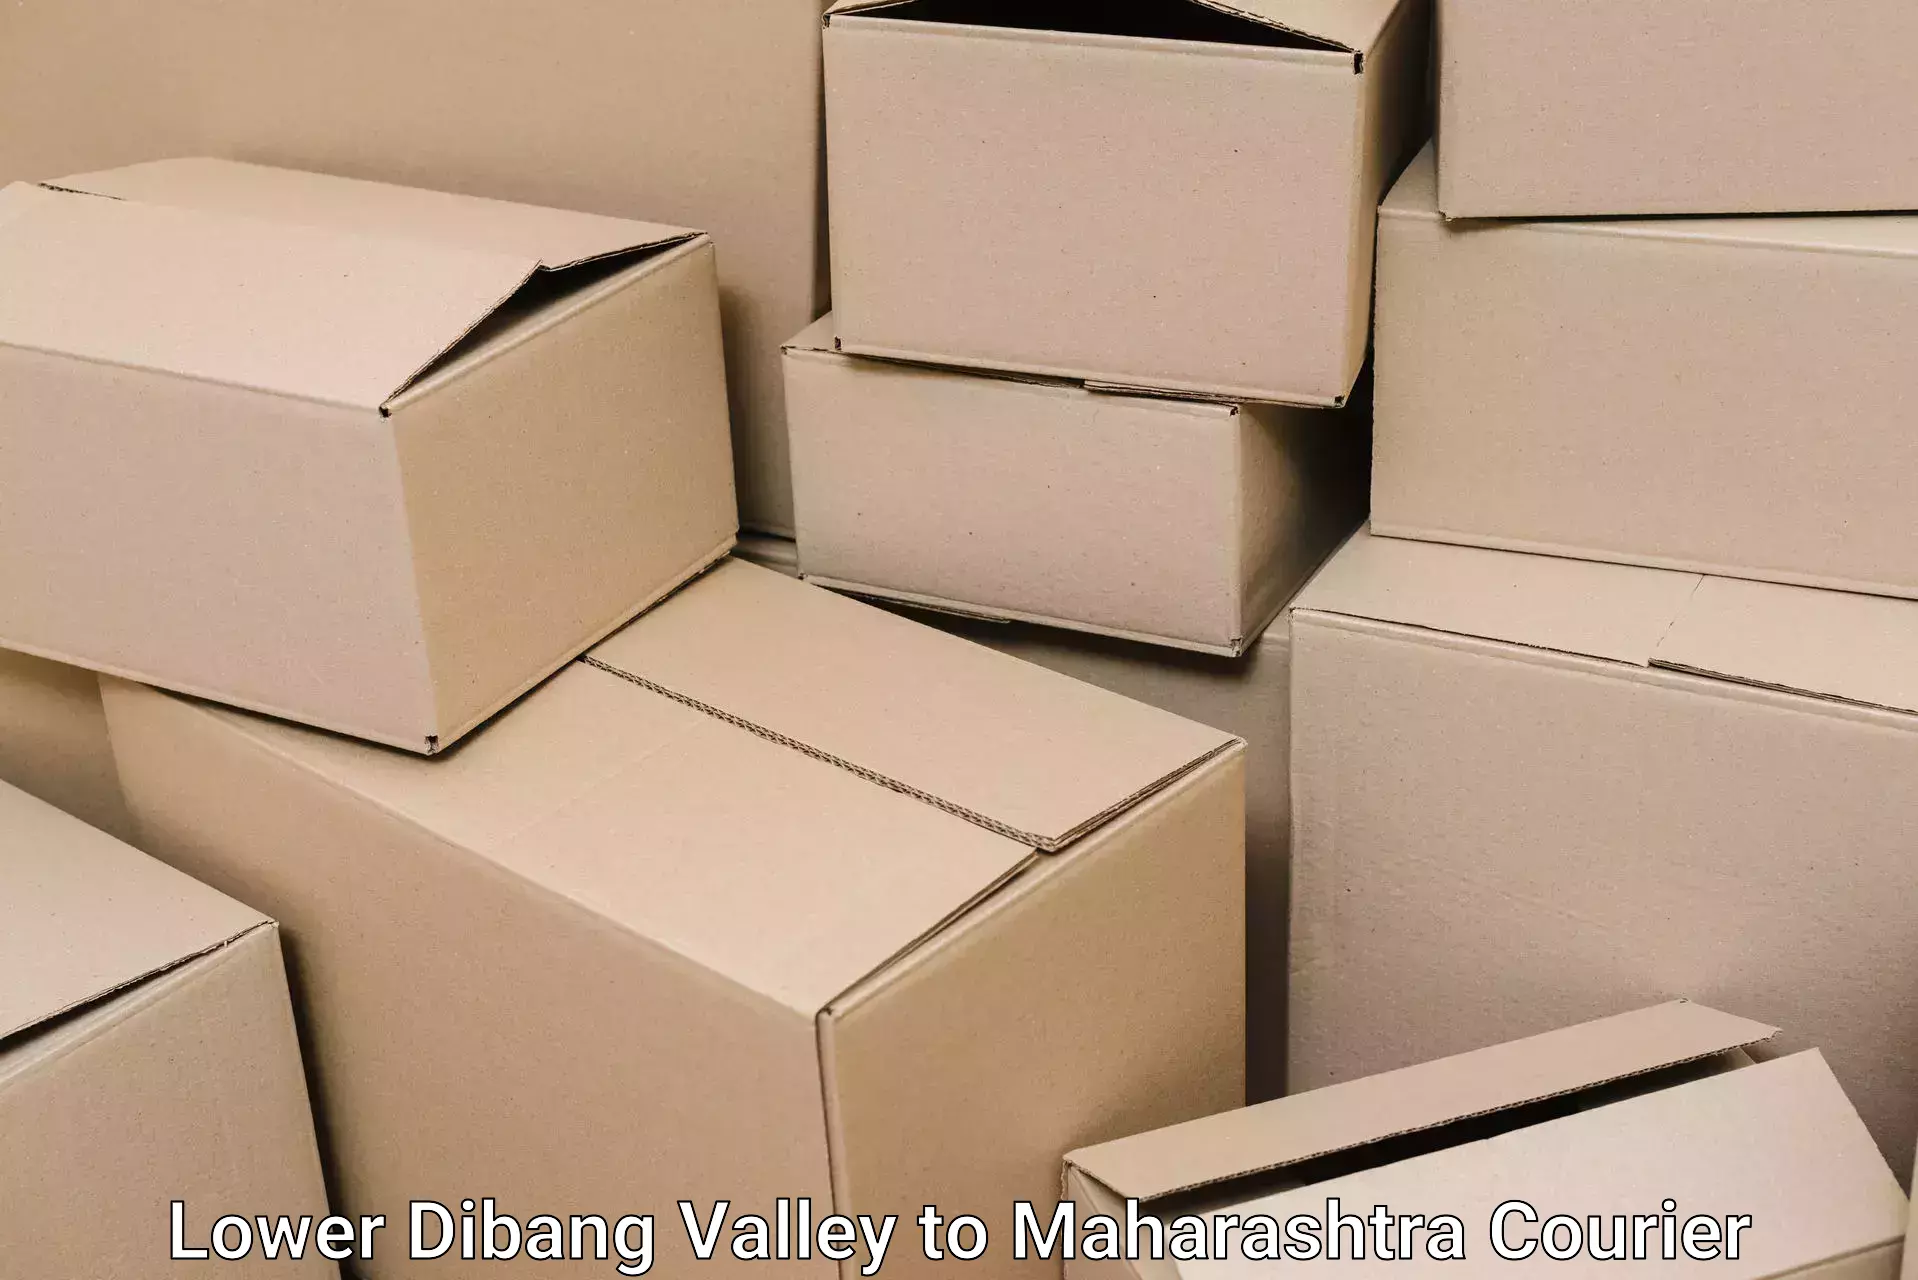 Packing and moving services Lower Dibang Valley to Wai